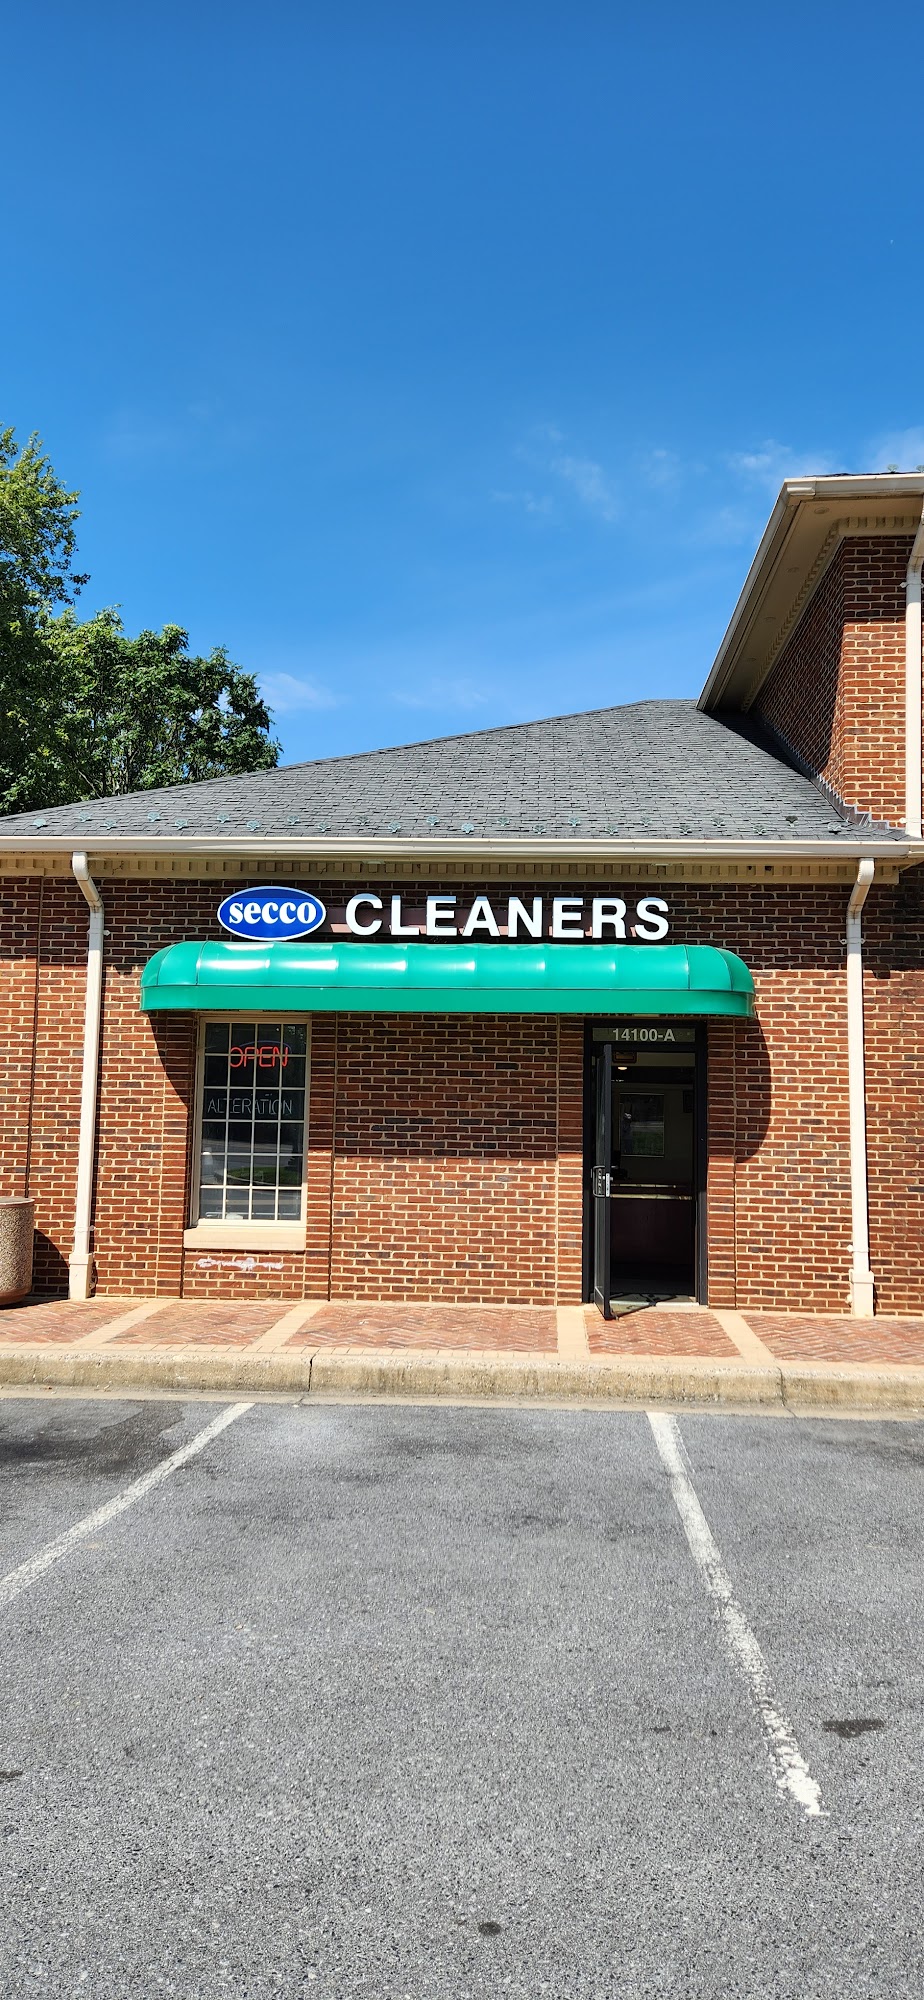 Secco Plus Cleaners